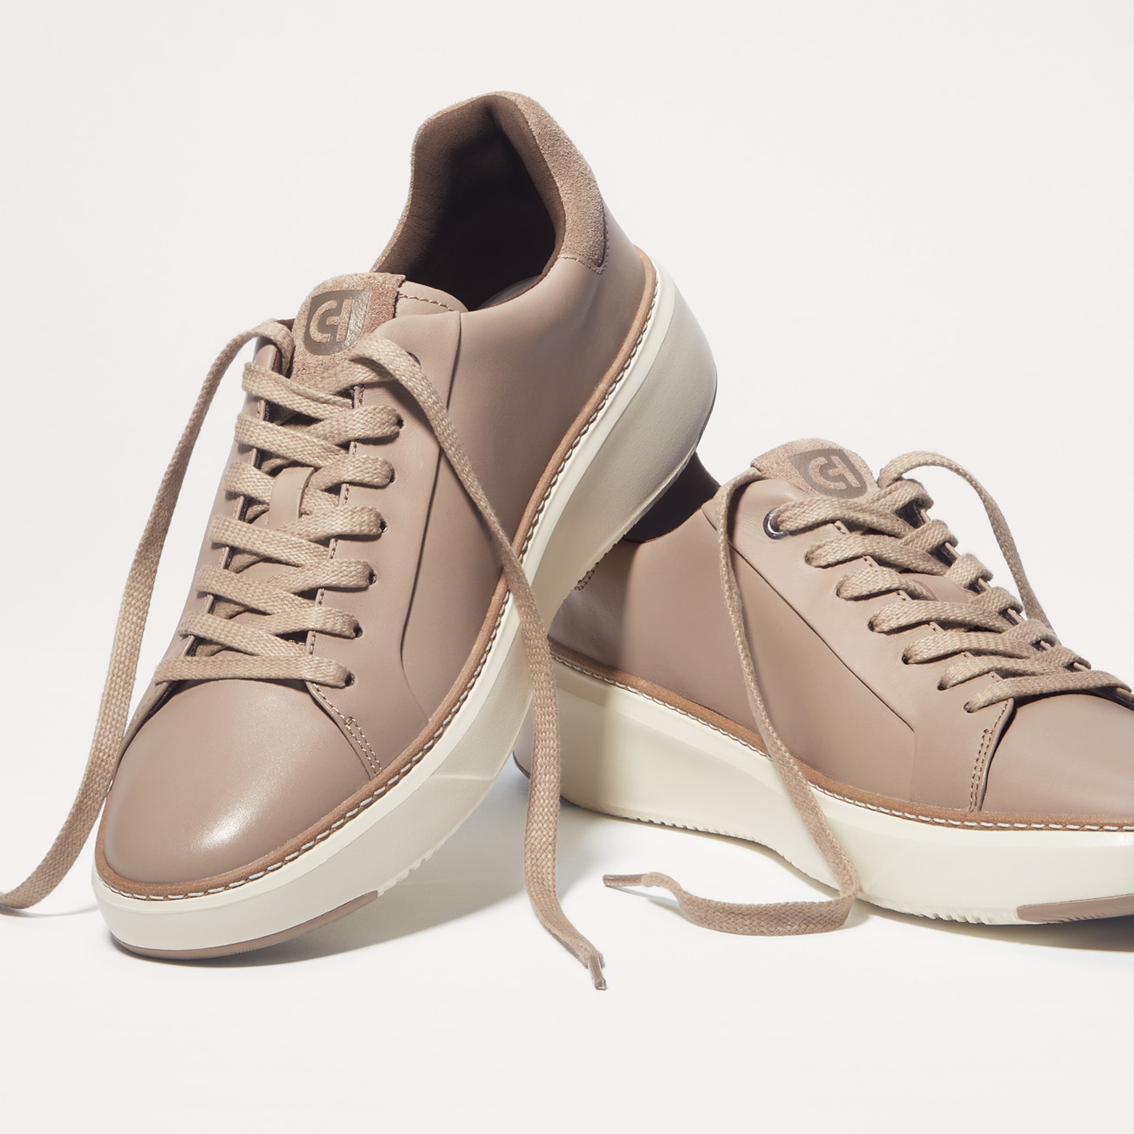 Cole Haan Grandpro Topspin in gold